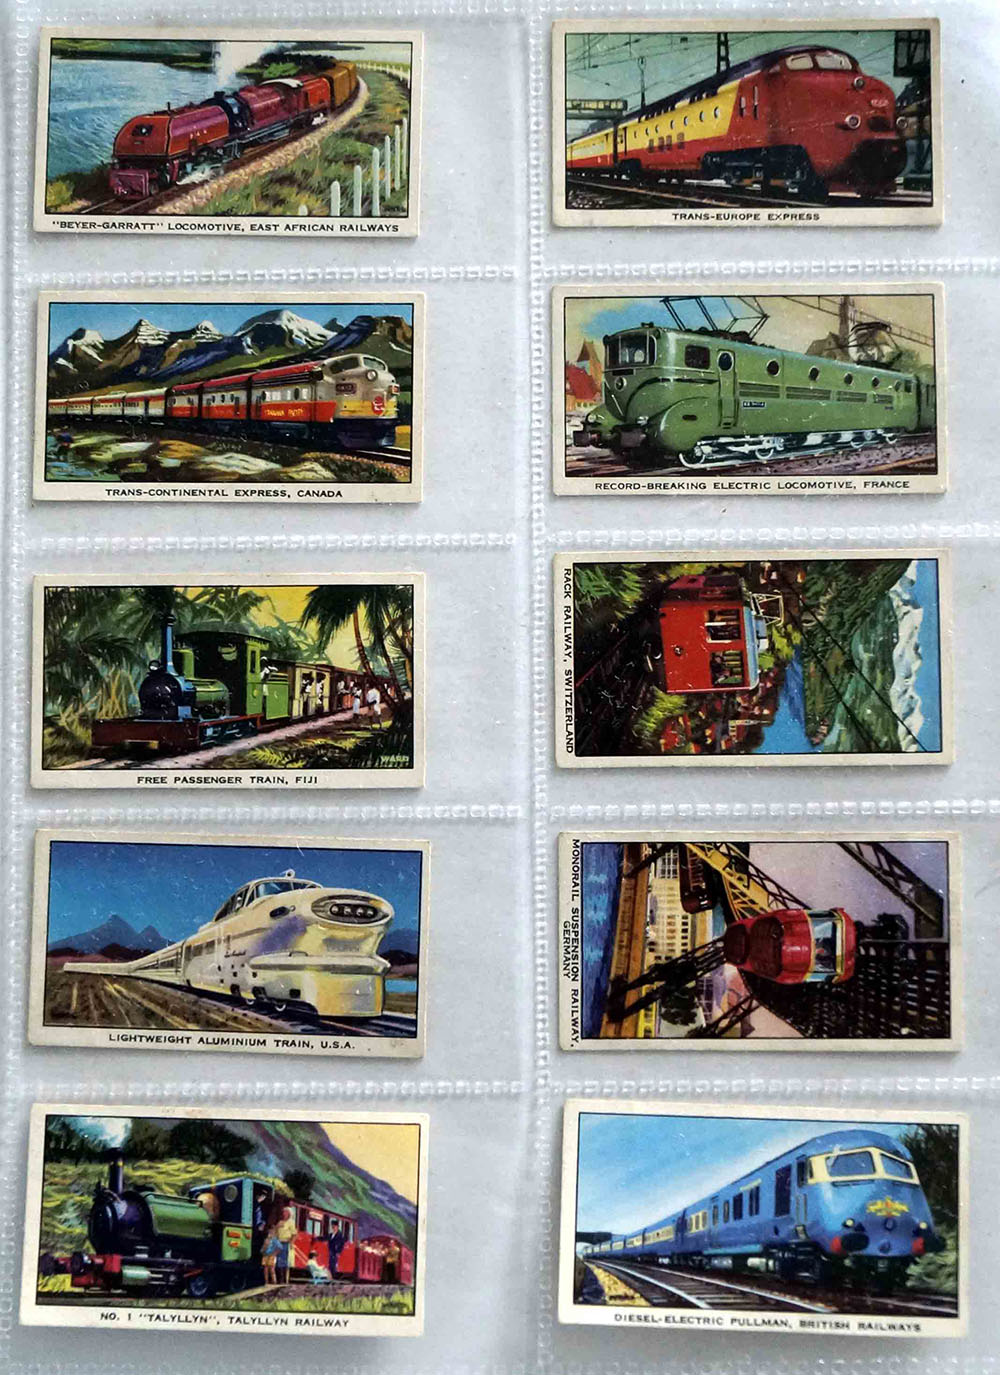 Full Set of 16 Cigarette Cards: The Story of the Locomotive (1965) art by Transport at The Illustration Art Gallery